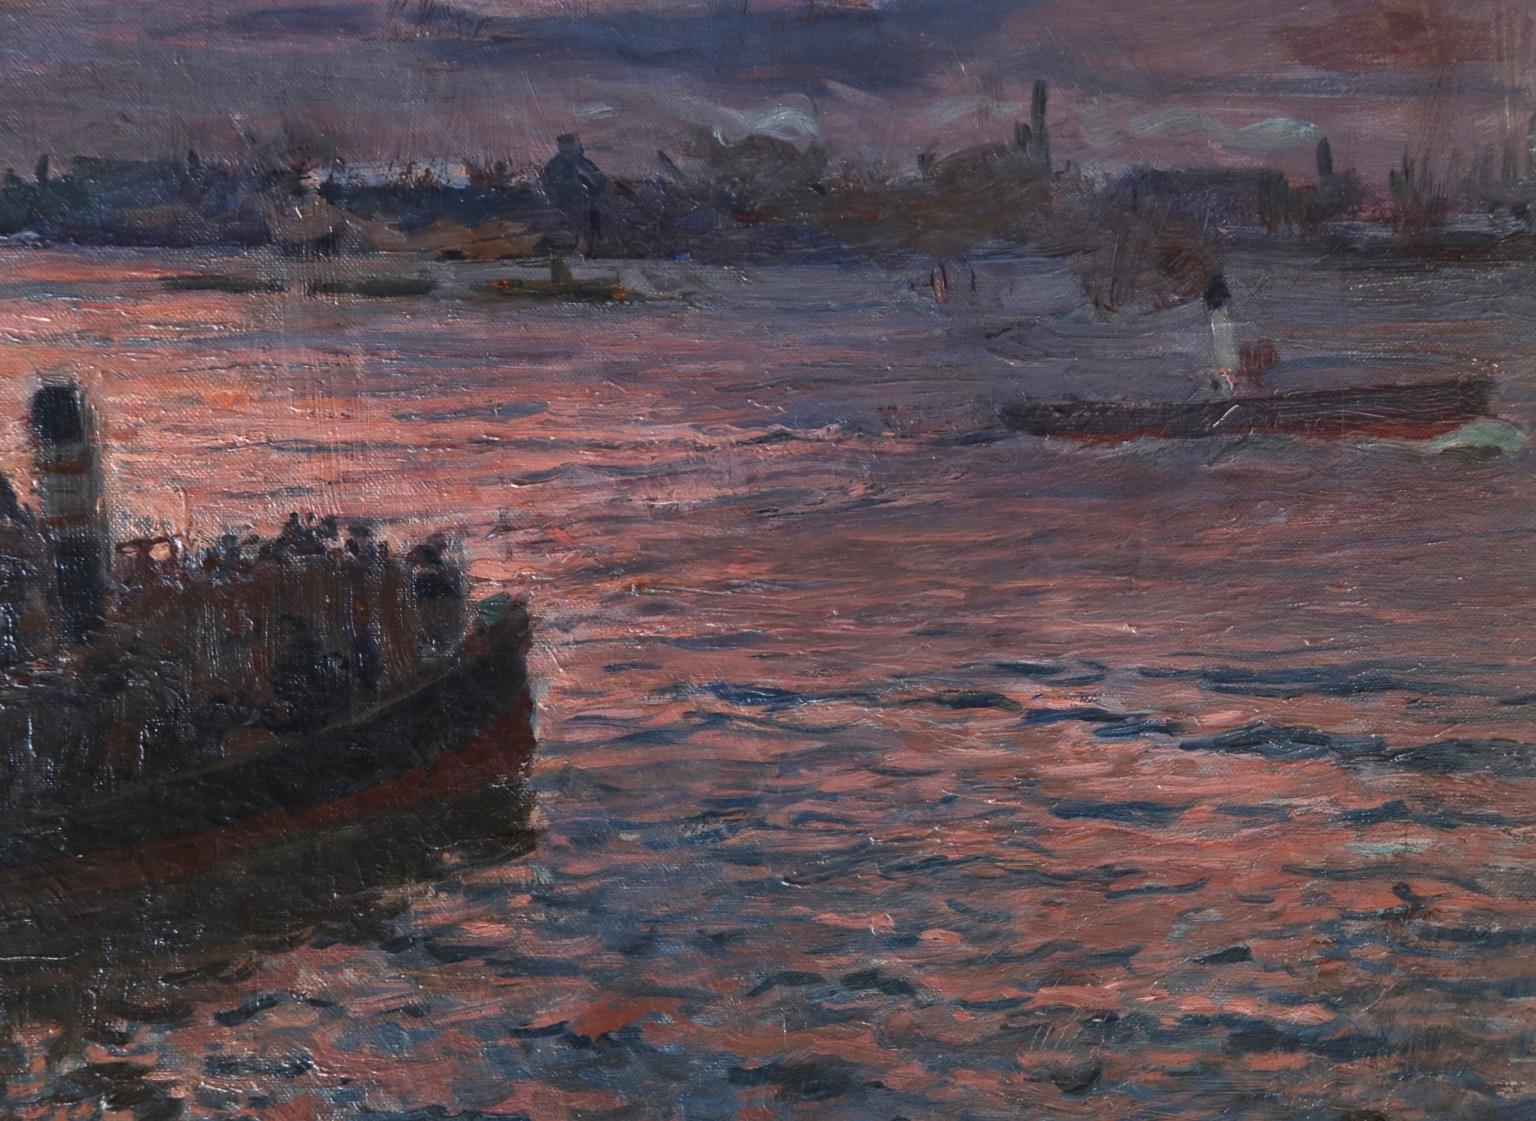 Waiting for the Ferry - Hamburg - Impressionist Oil, River at Night - Kallmorgen 2